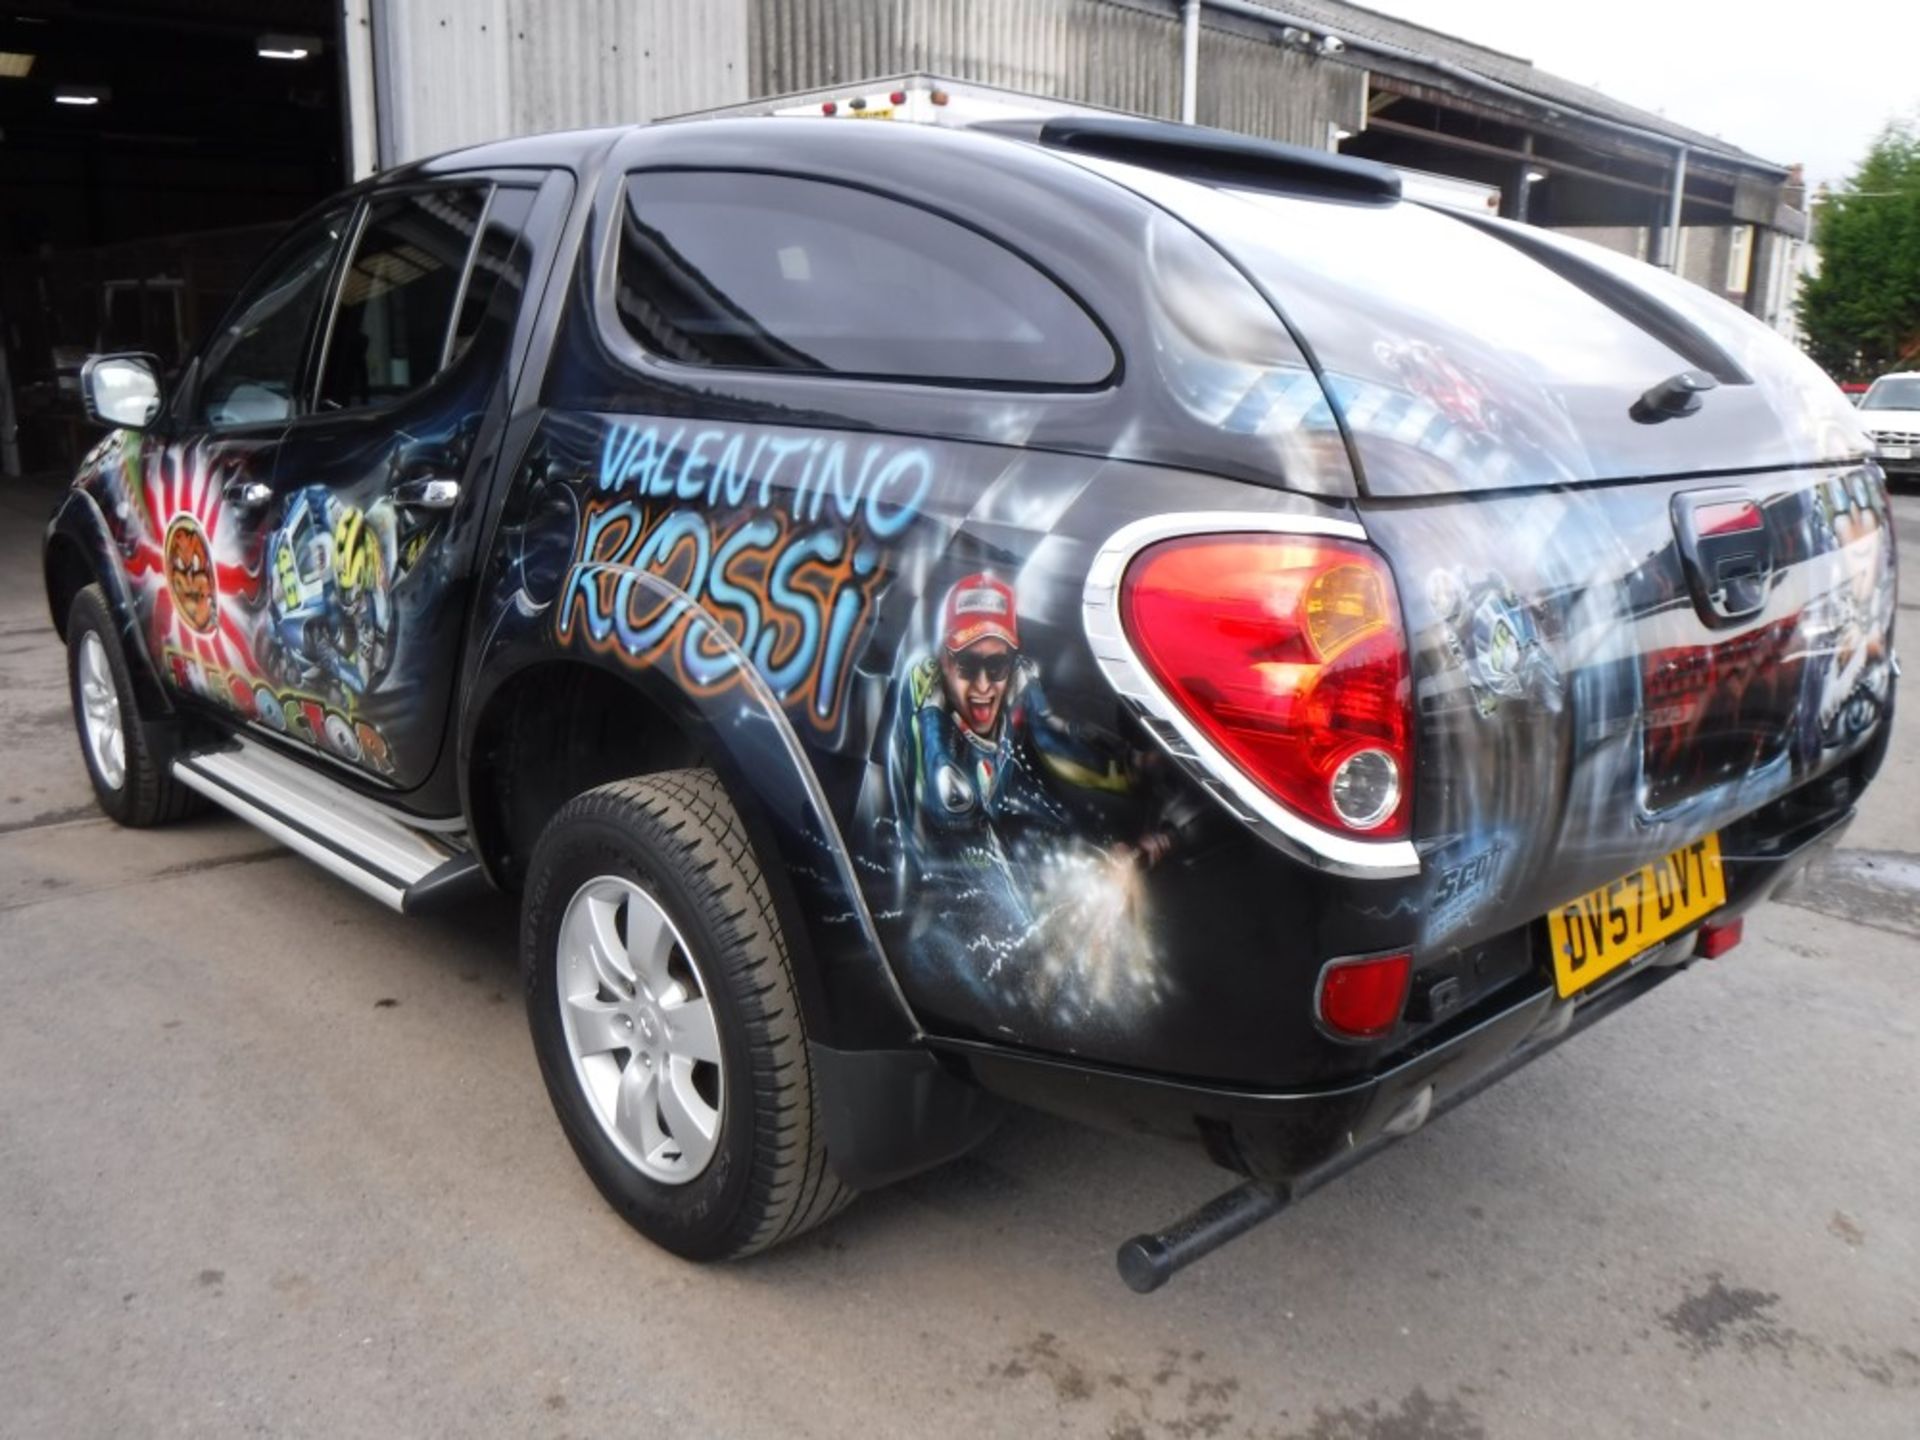 57 reg MITSUBISHI L200 ANIMAL DI-D D/C PICKUP WITH CUSTOMISED VALENTINO ROSSI AIR BRUSHED PAINTWORK, - Image 3 of 6